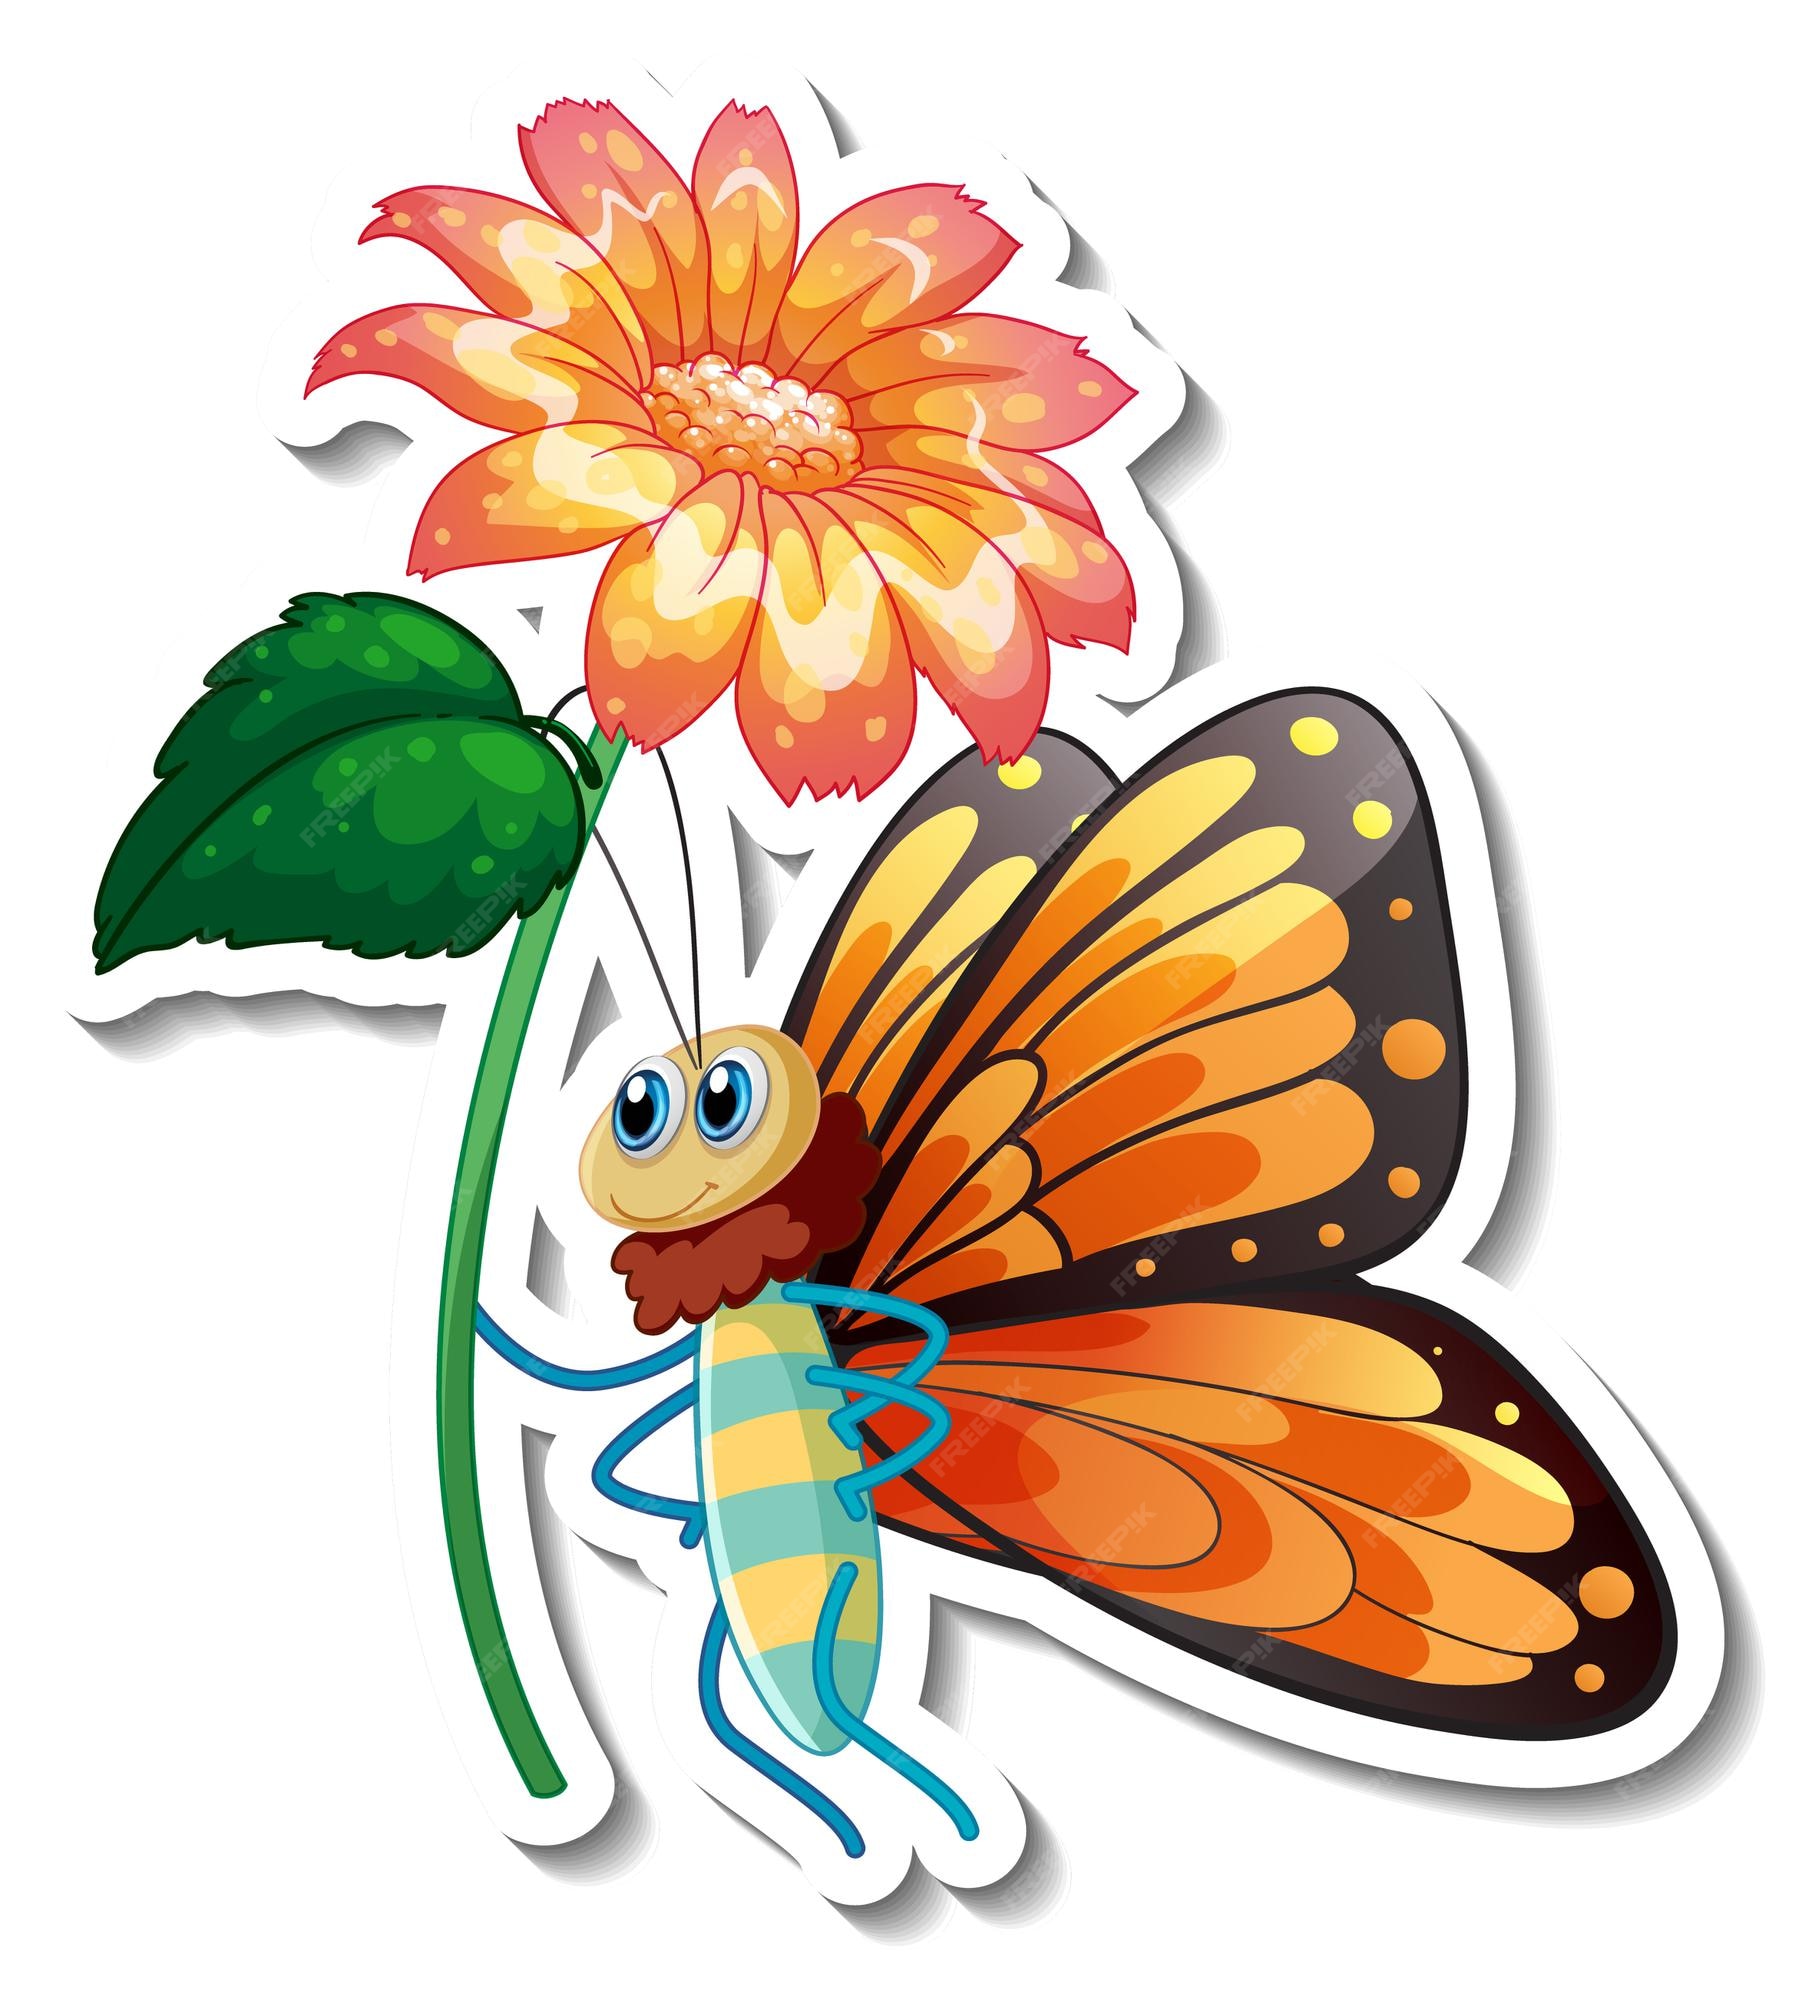 Butterfly Sticker Images - Free Download on Freepik